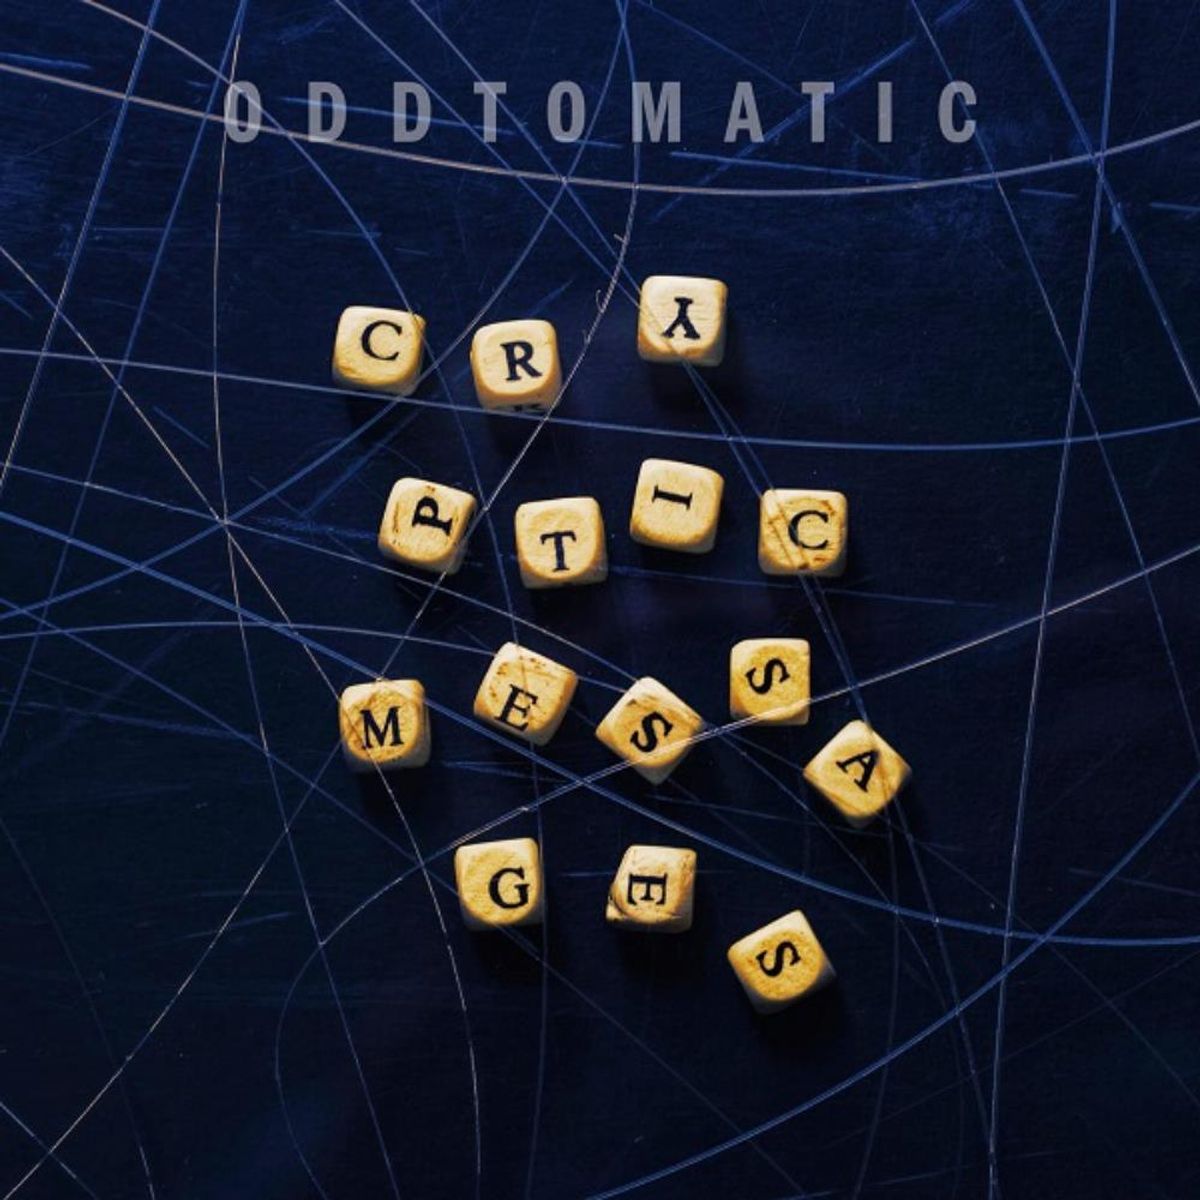 Oddtomatic - 'Cryptic Messages'